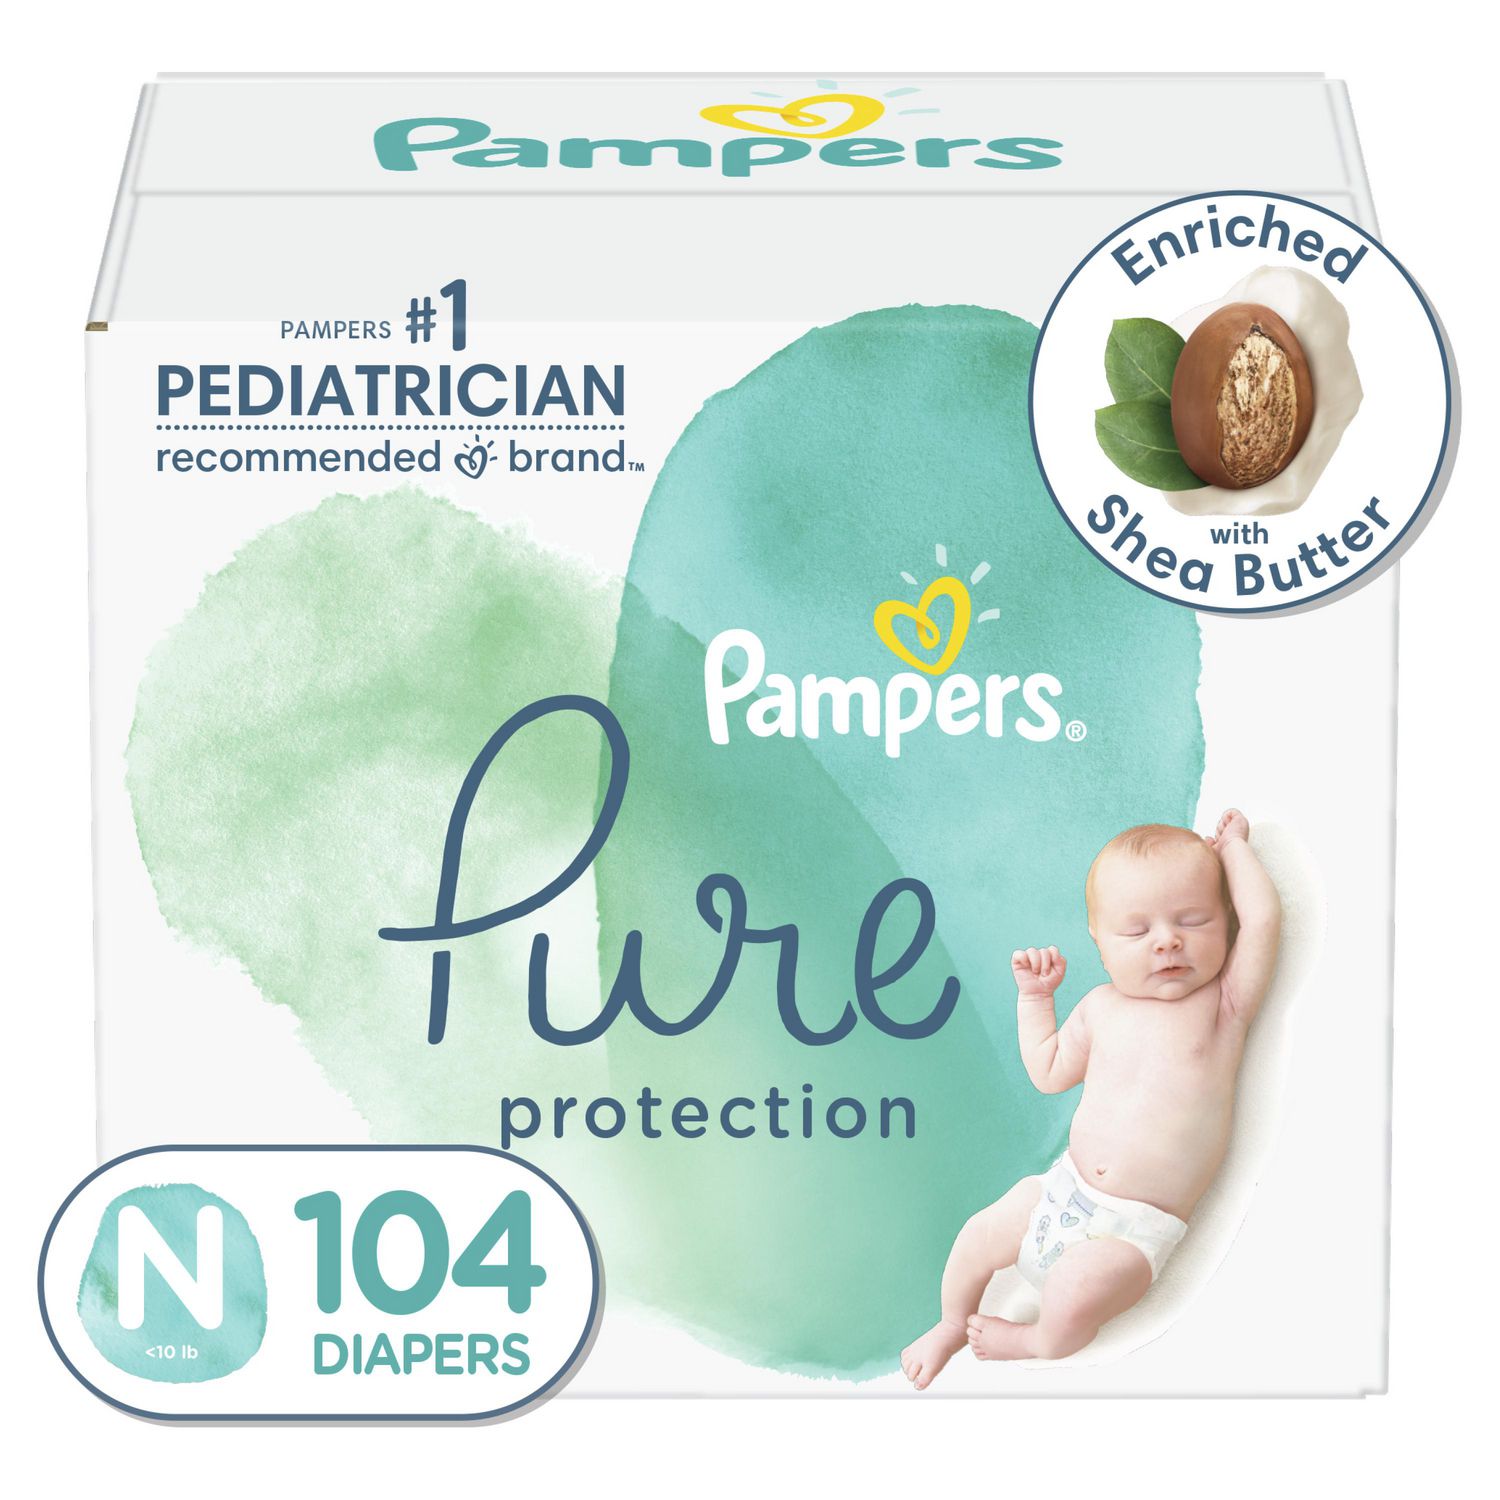 pampers pure canada